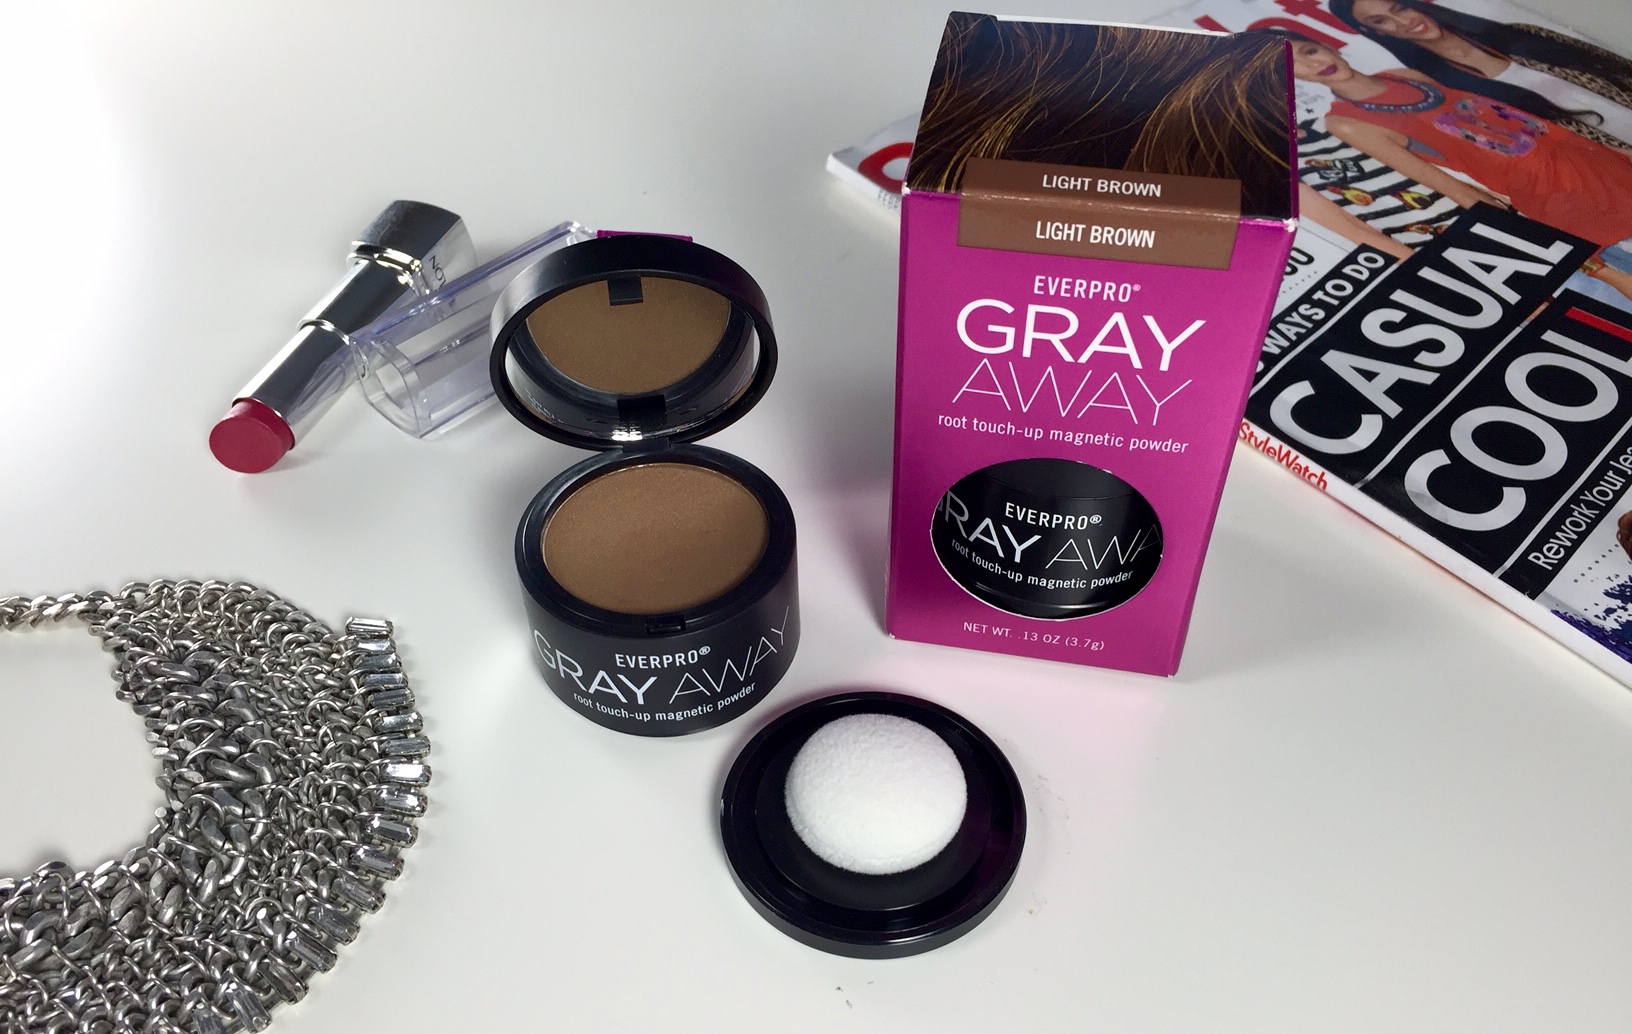 Afsnit aften monarki A Genius Way To Conceal The Gray : Gray Away Root Touch-Up Magnetic Powder  - JennySue Makeup